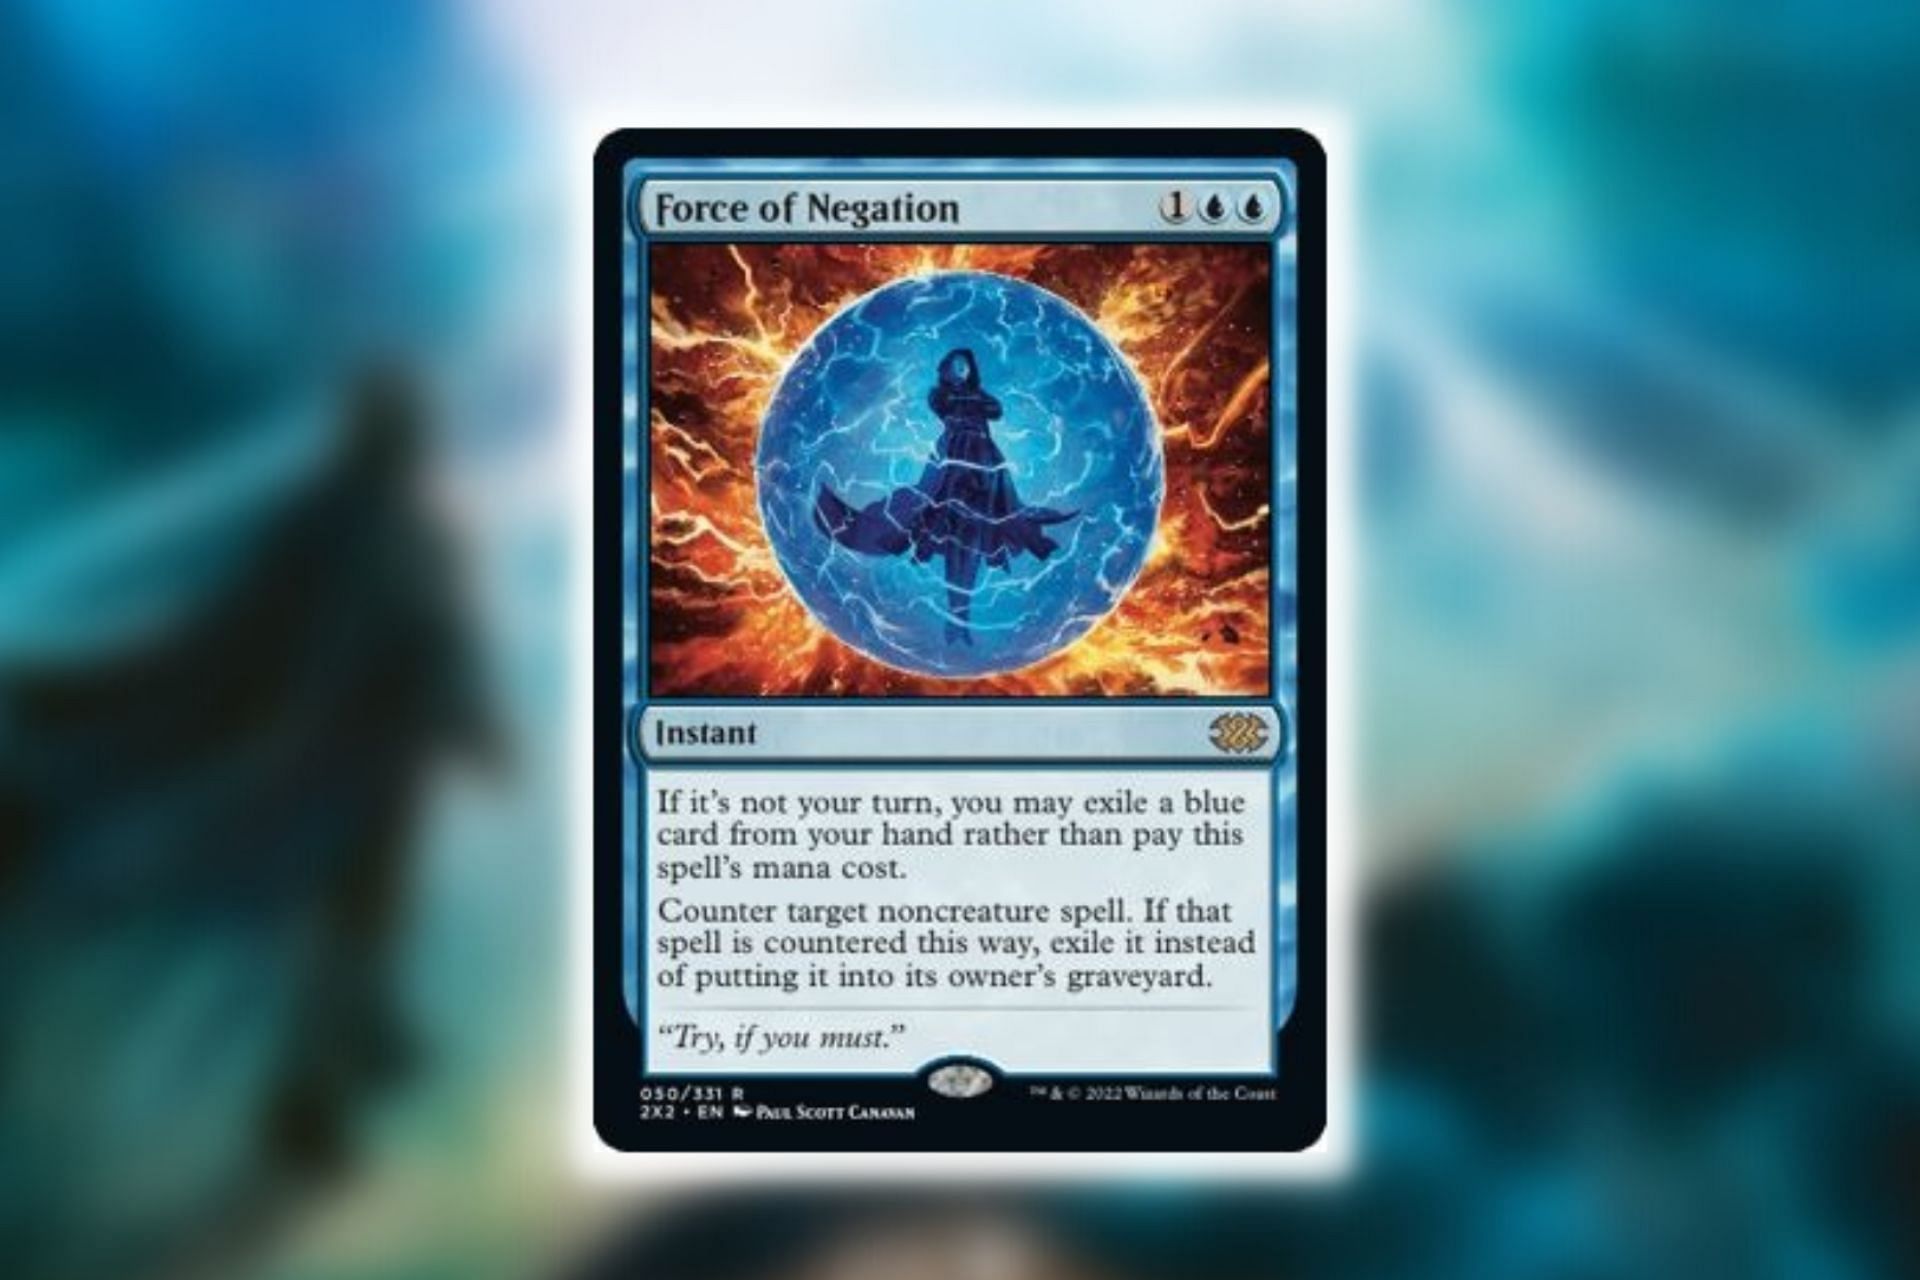 Force of Negation in Magic: The Gathering (Image via Wizards of the Coast)